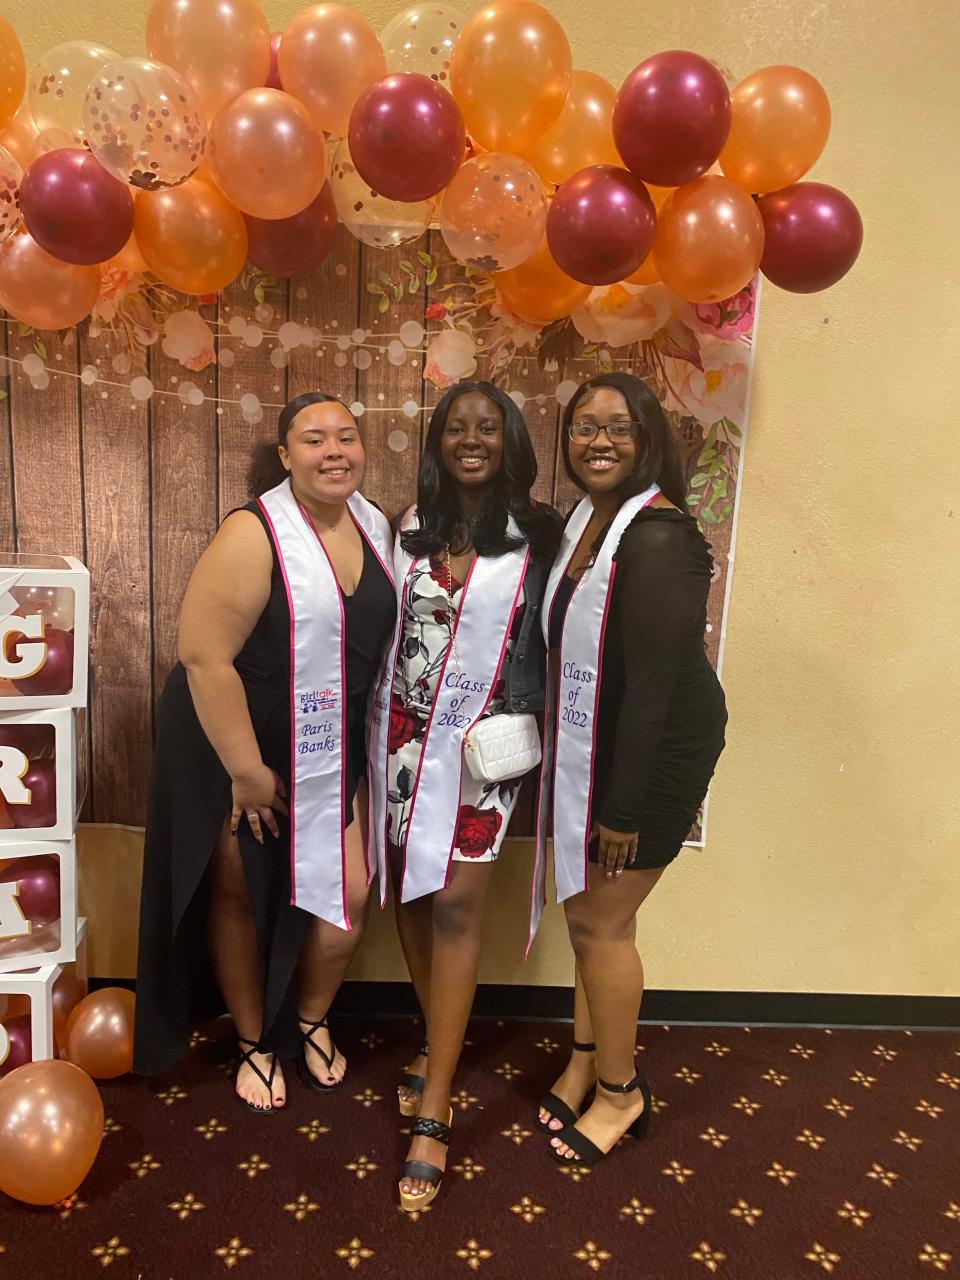 What’s better than partying with your two BFFs? Haslam Scholar Jahneulie Weste is flanked by Paris Banks and Brieanna Kirk at Fulton High School’s Girl Talk Senior Celebration. May 2022